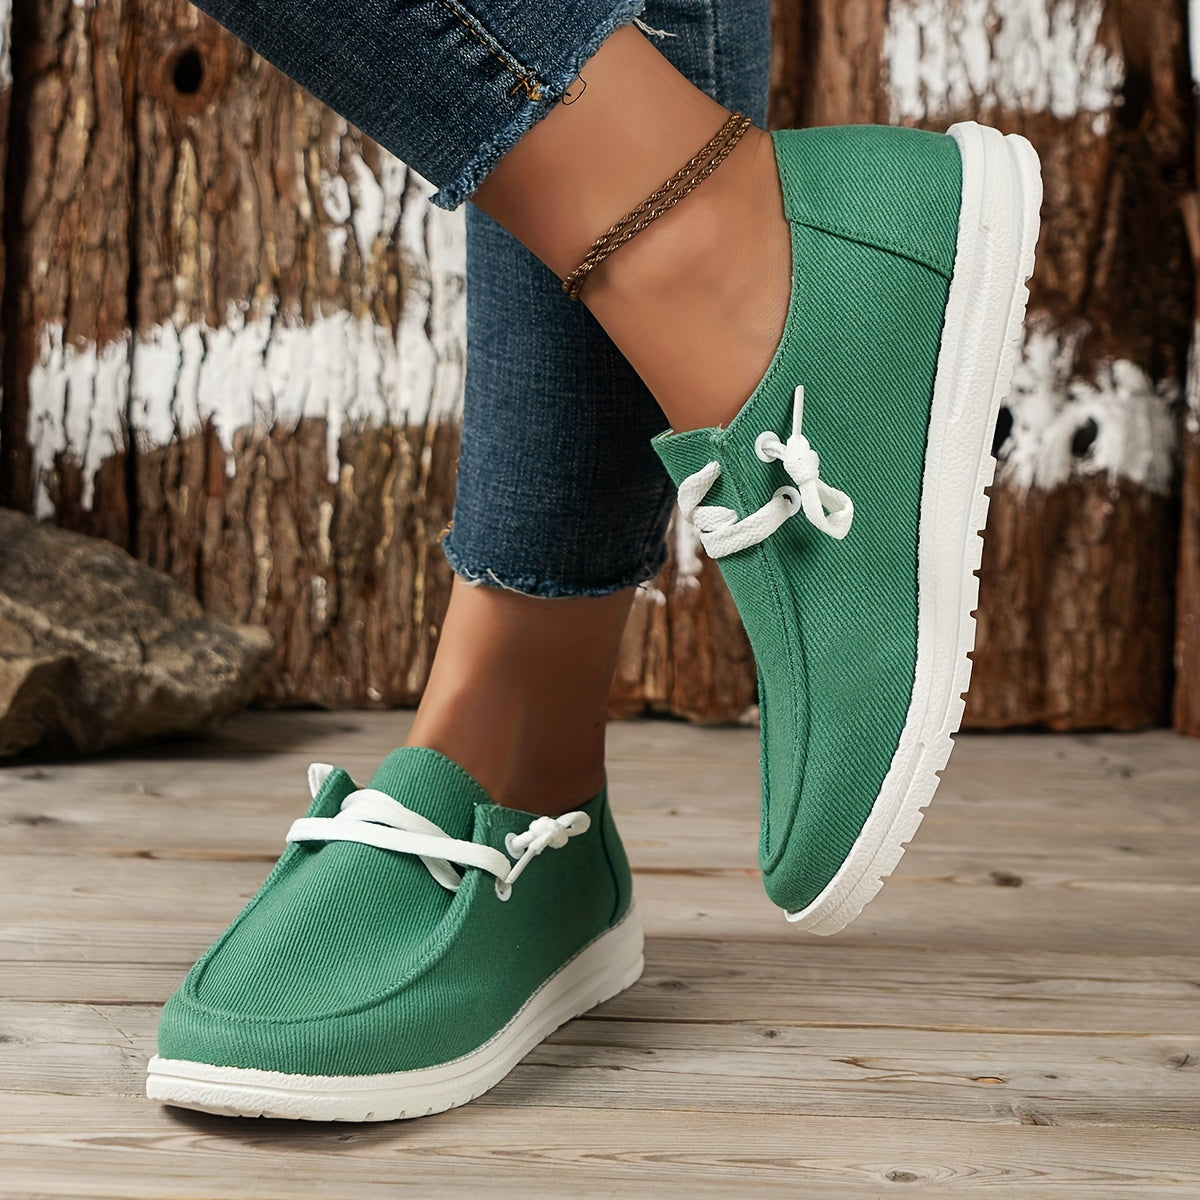 Women's Low Top Canvas Shoes, Round Toe Slip On Flat Loafers, Casual Walking Shoes